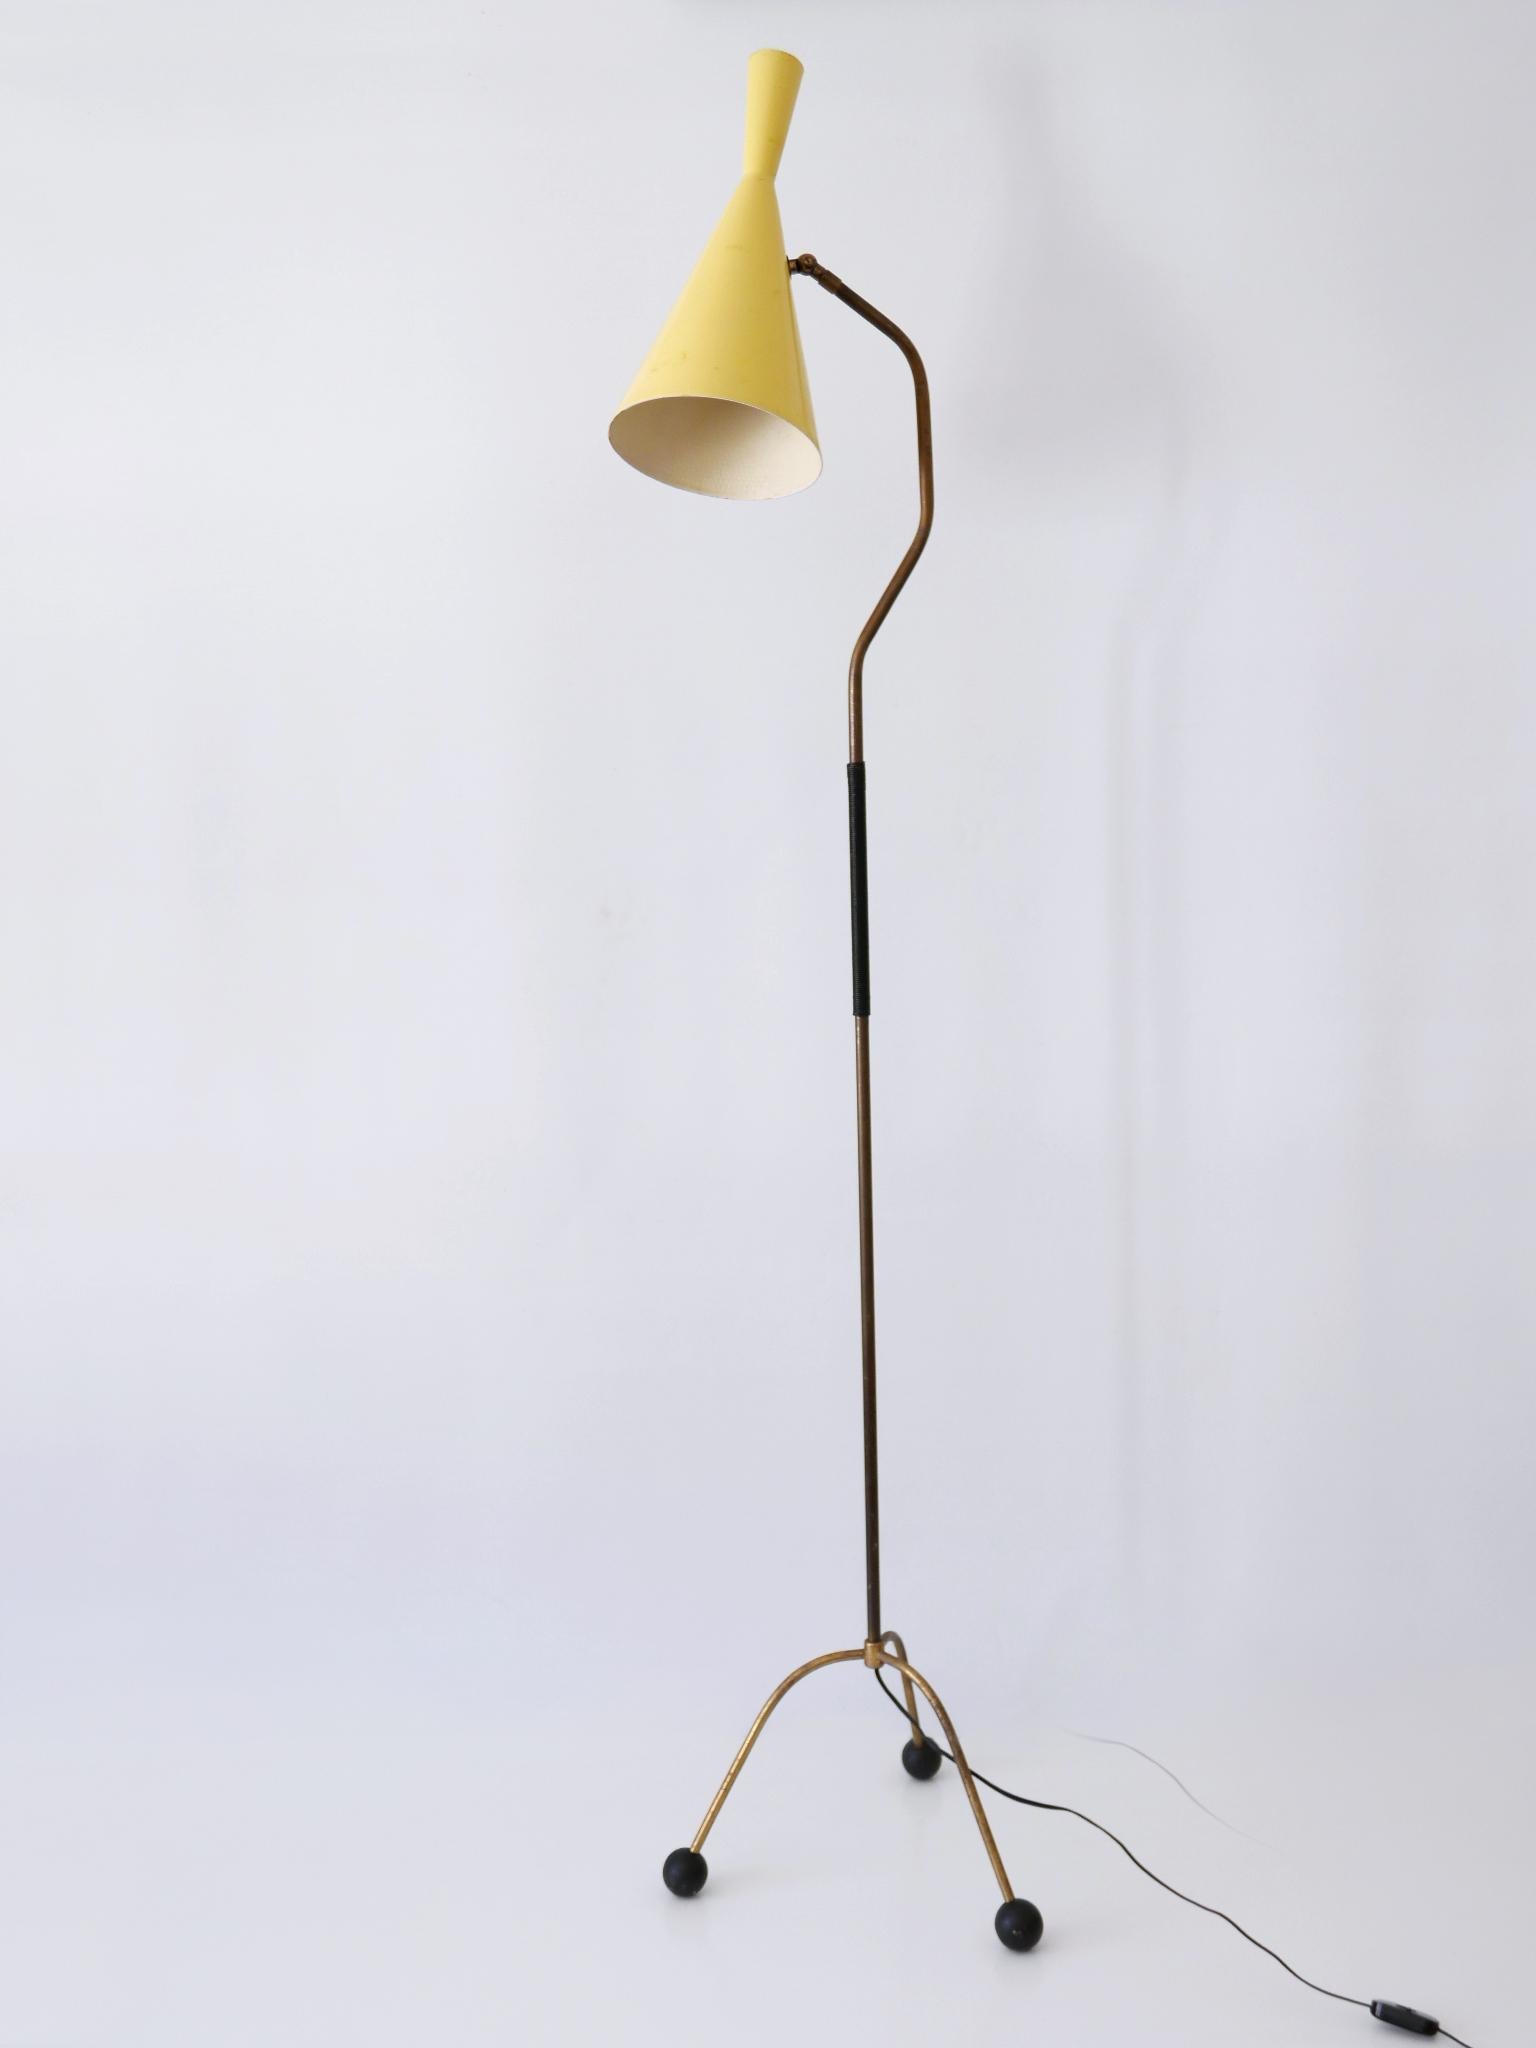 Absolutely rare, elegant and highly decorative Mid-Century Modern floor lamp or reading light. Designed and manufactured probably in Austria, 1950s.

Executed in brass and aluminium, the lamp needs 1 x E27 / E26 Edison screw fit bulb, is wired, and